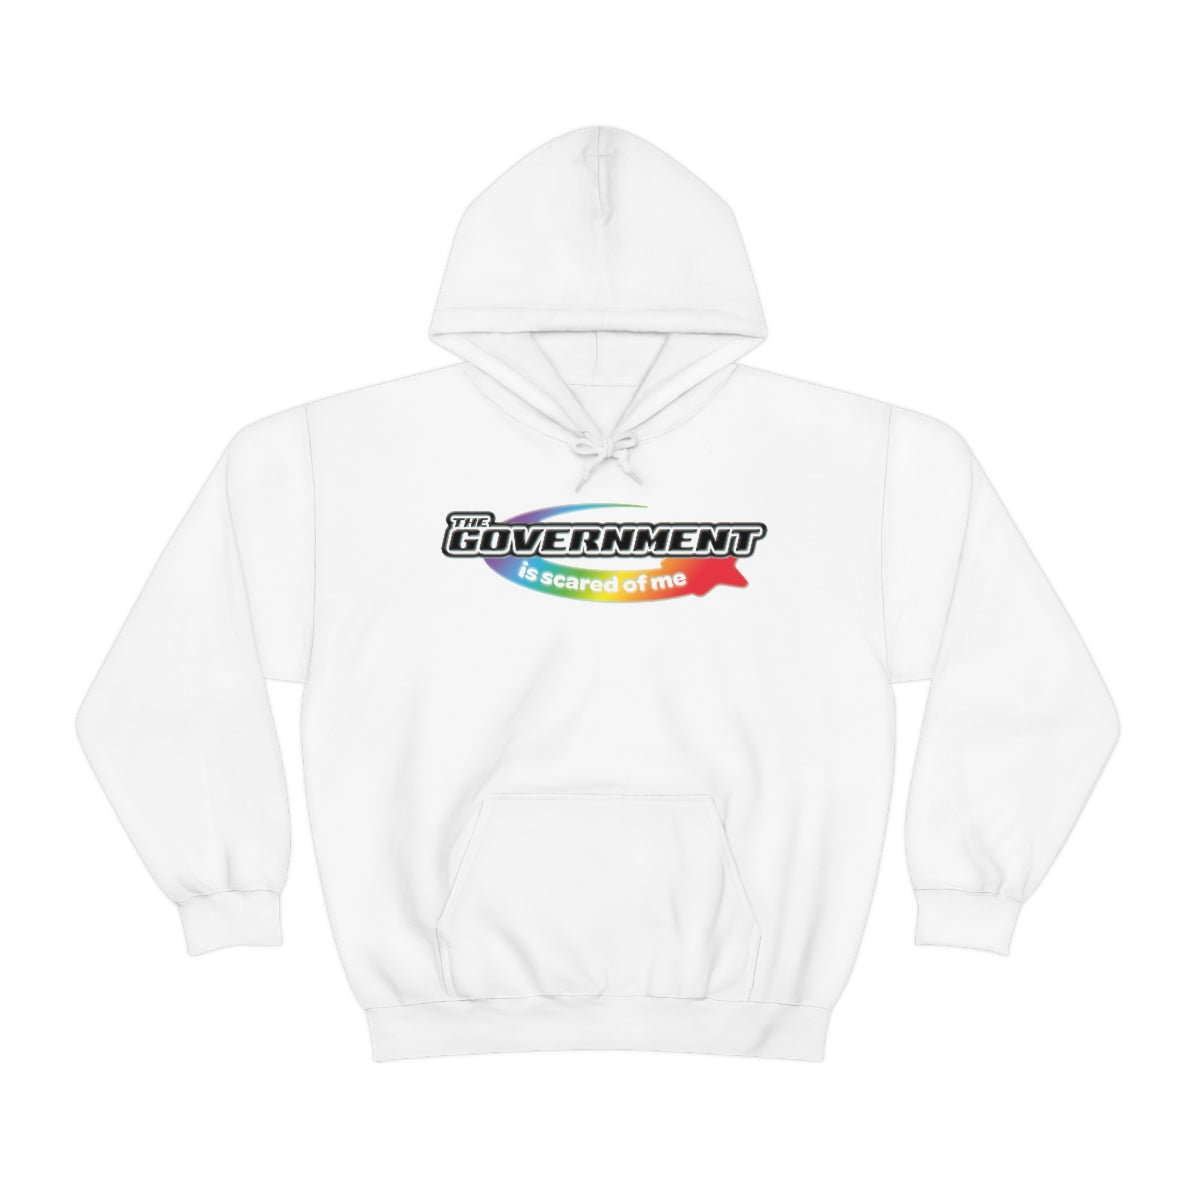 "The GOVERNMENT Is Scared Of Me" hoodie